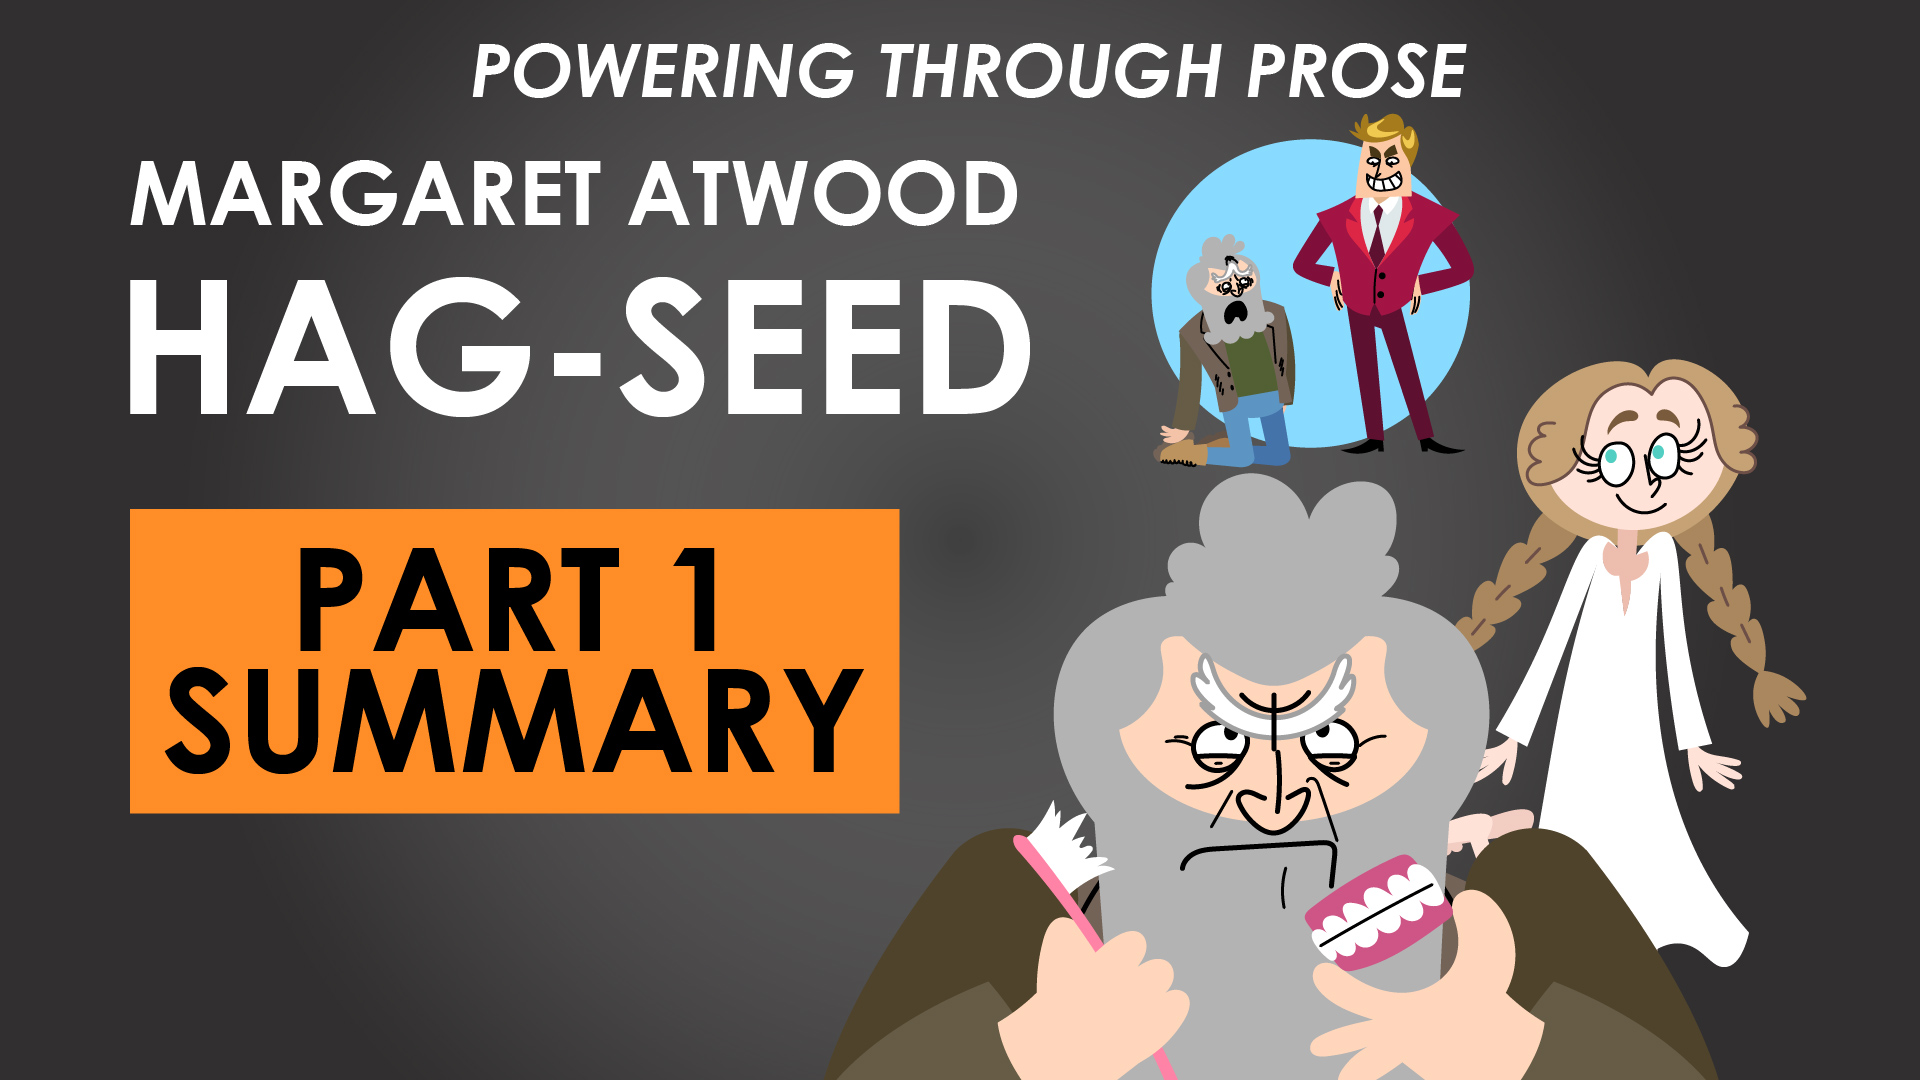 Hag-Seed - Margaret Atwood - Part 1 Summary - Powering through Prose Series